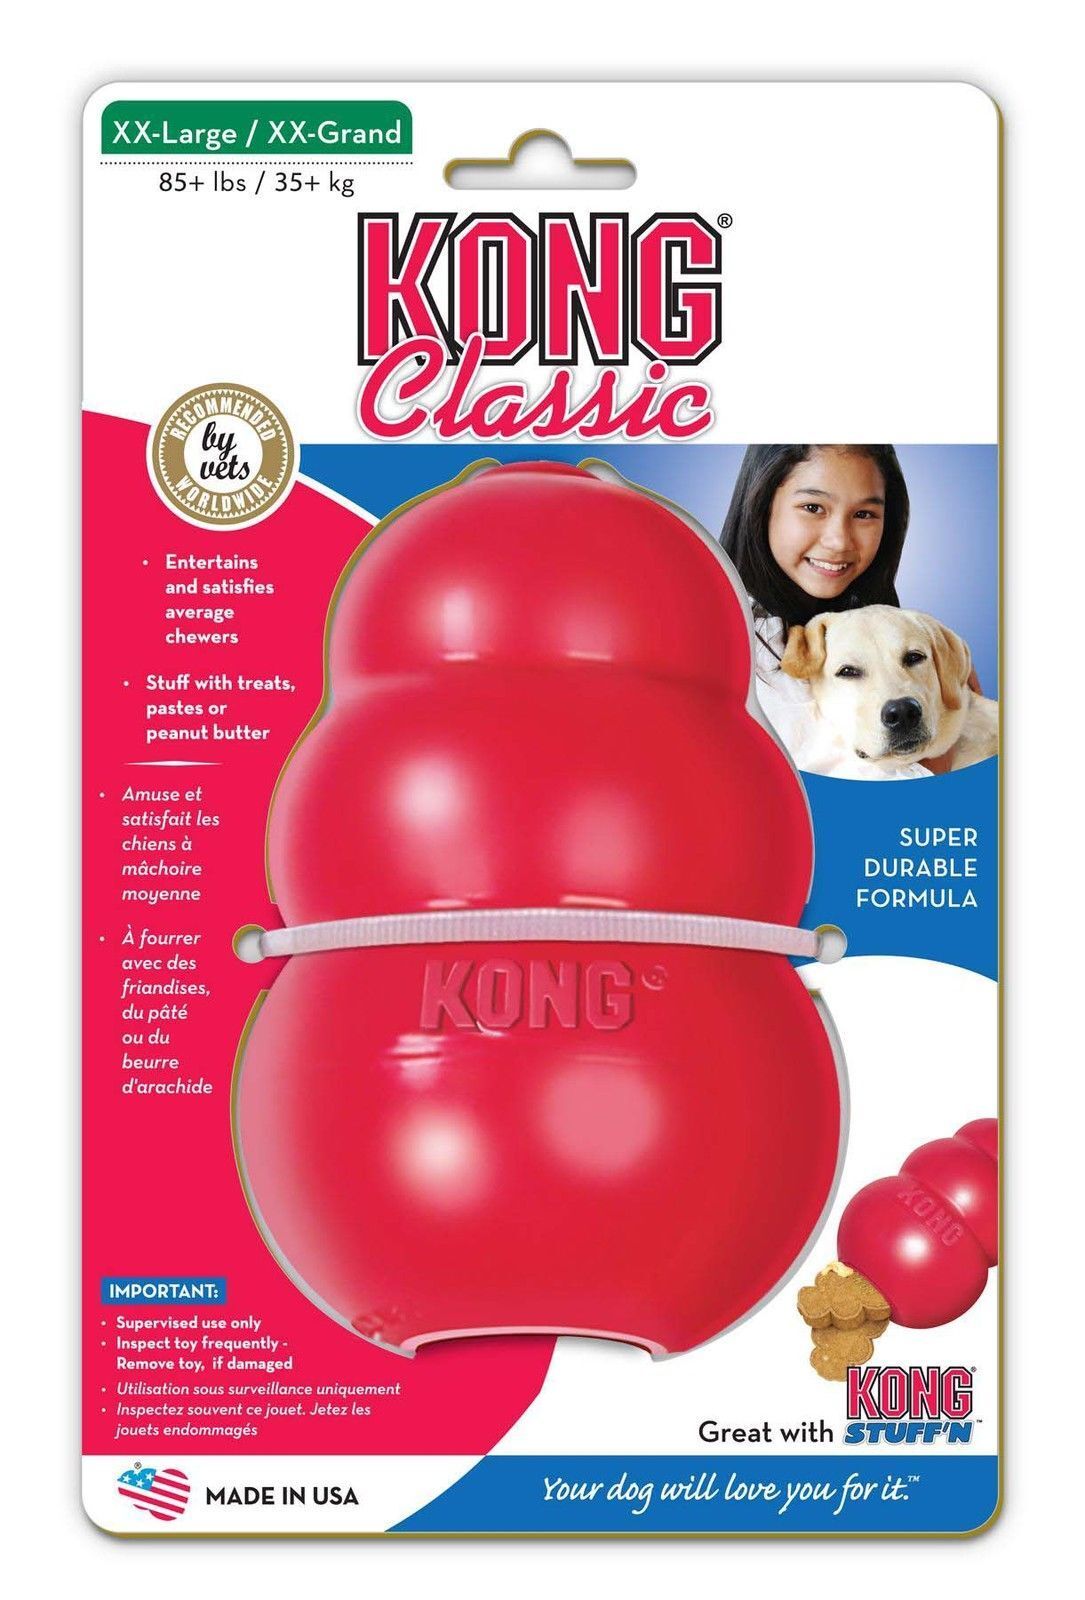 3 x KONG Classic Red Stuffable Non-Toxic Fetch Interactive Dog Toy - Large image 1